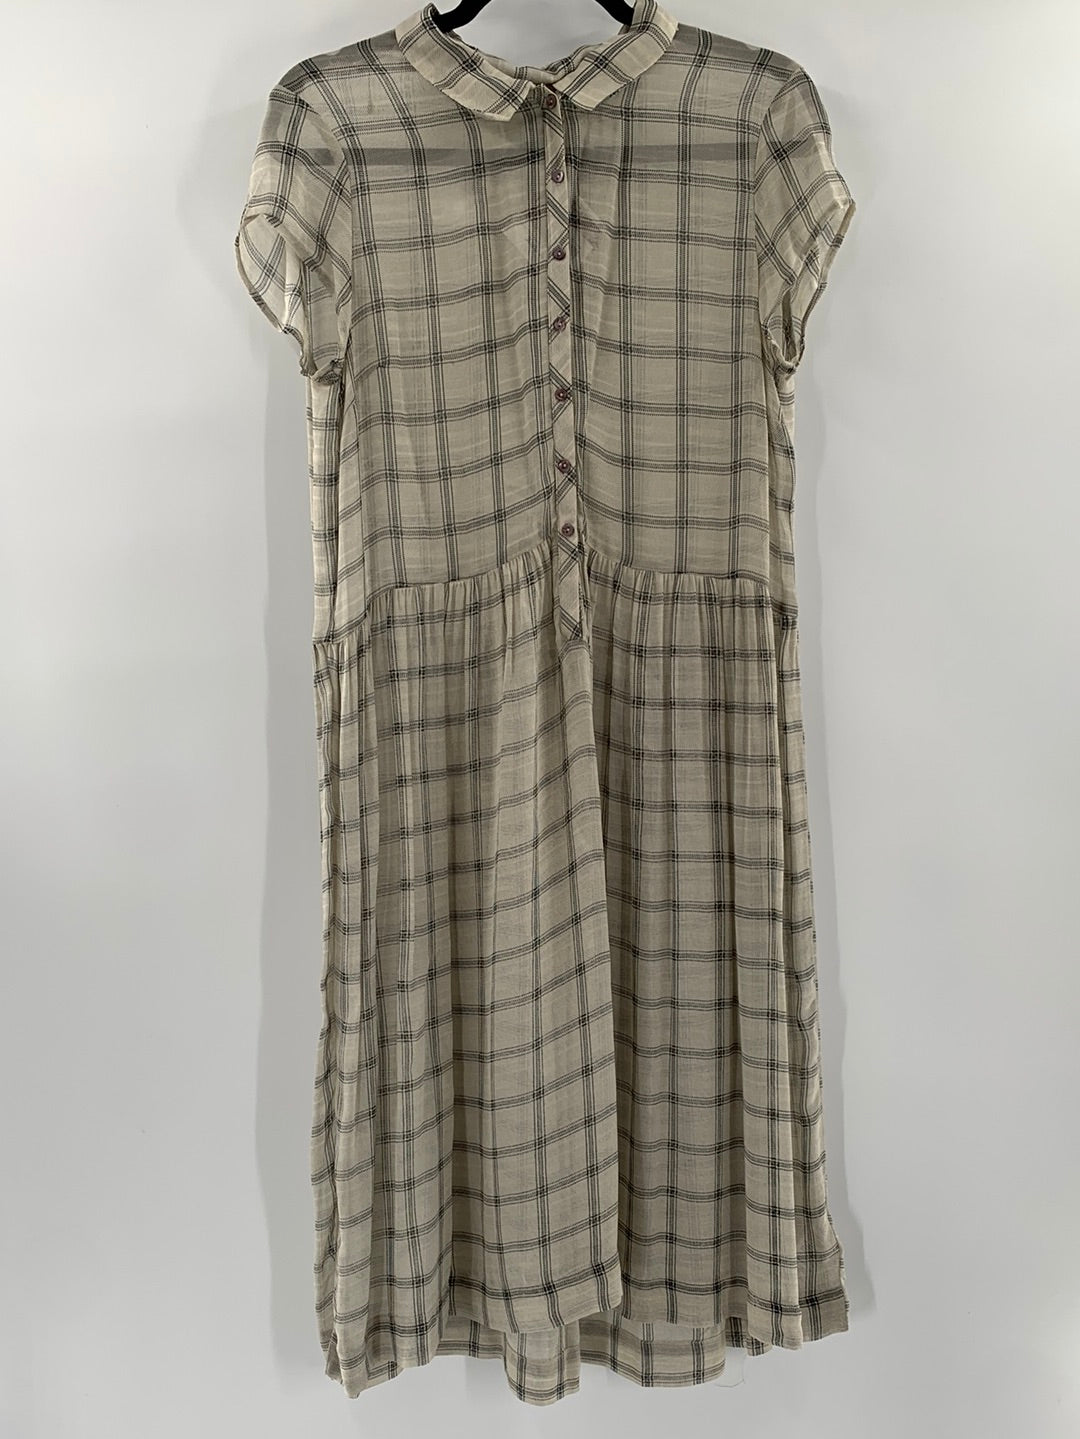 Cooperative - Front Button Up Flannel Patterned Pleated Midi Dress (Size Medium)